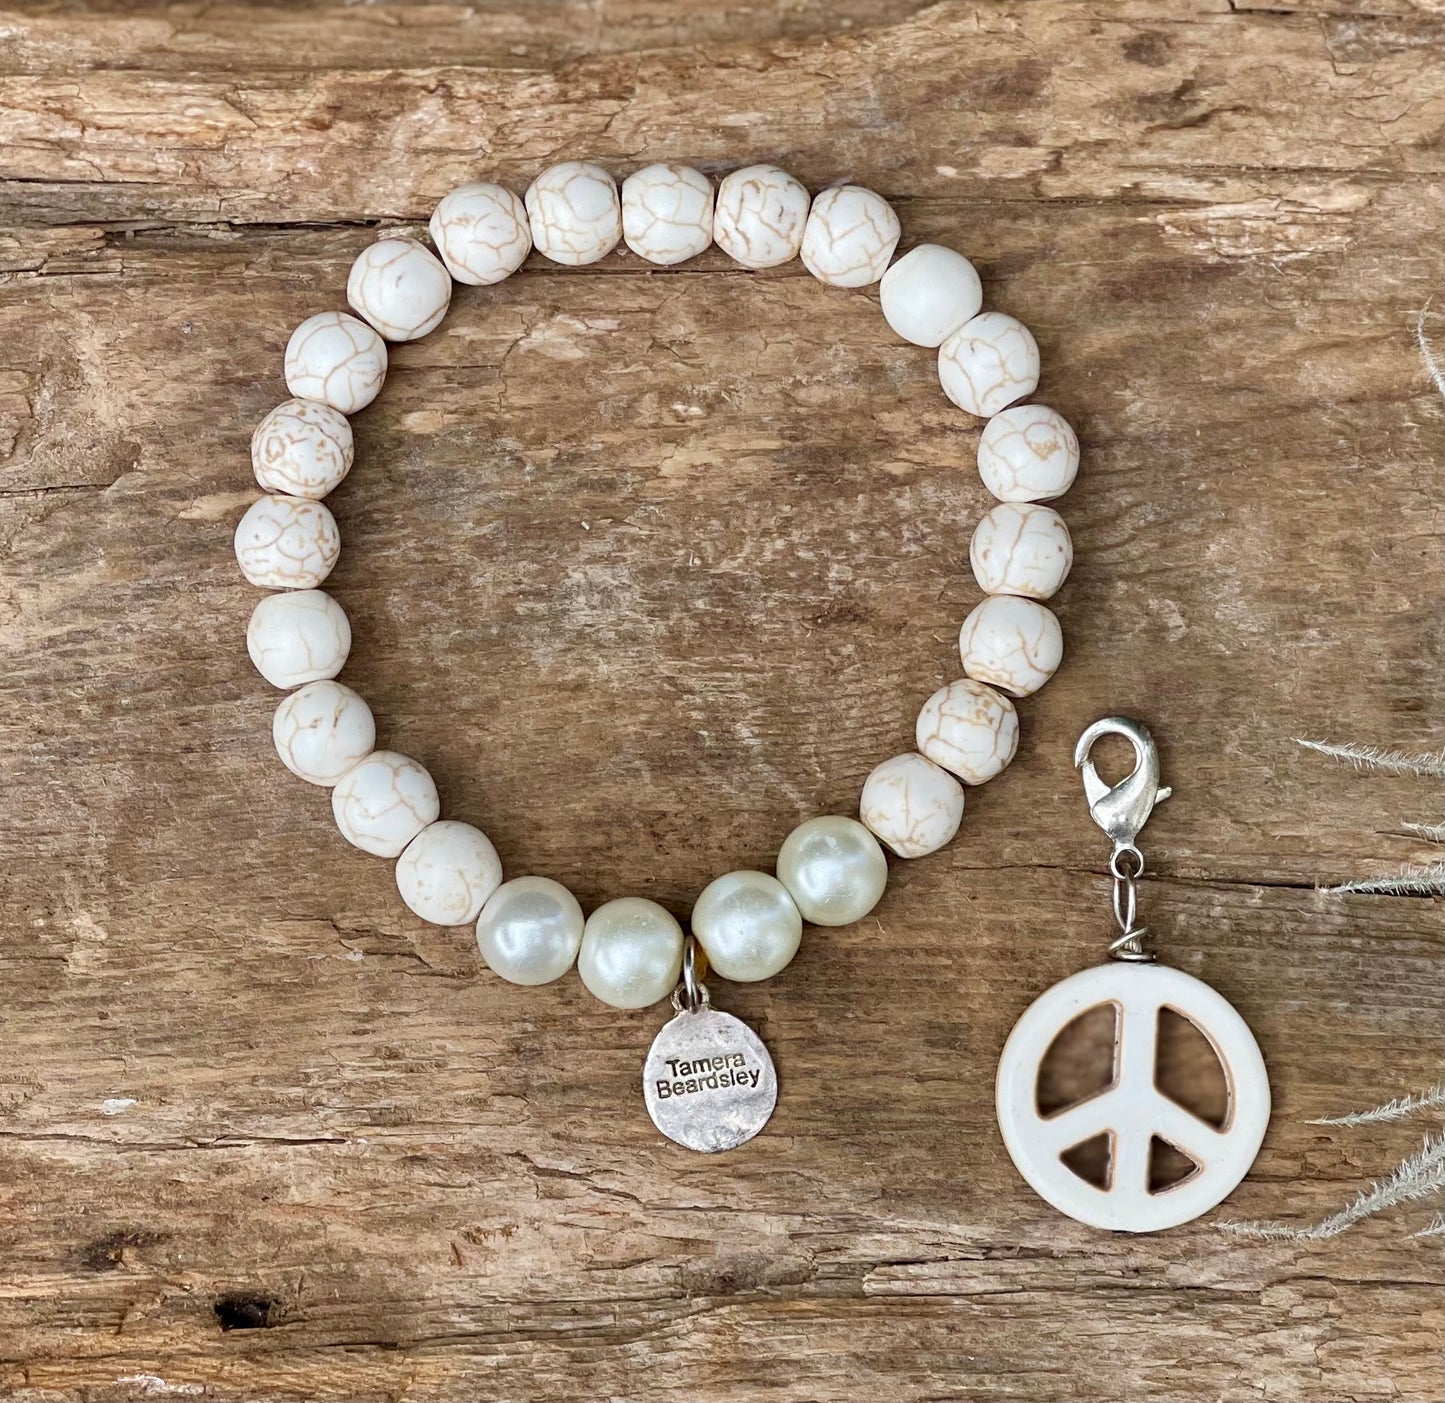 Protect Your Peace - Howlite Calm Bracelet with Removable Peace Charm